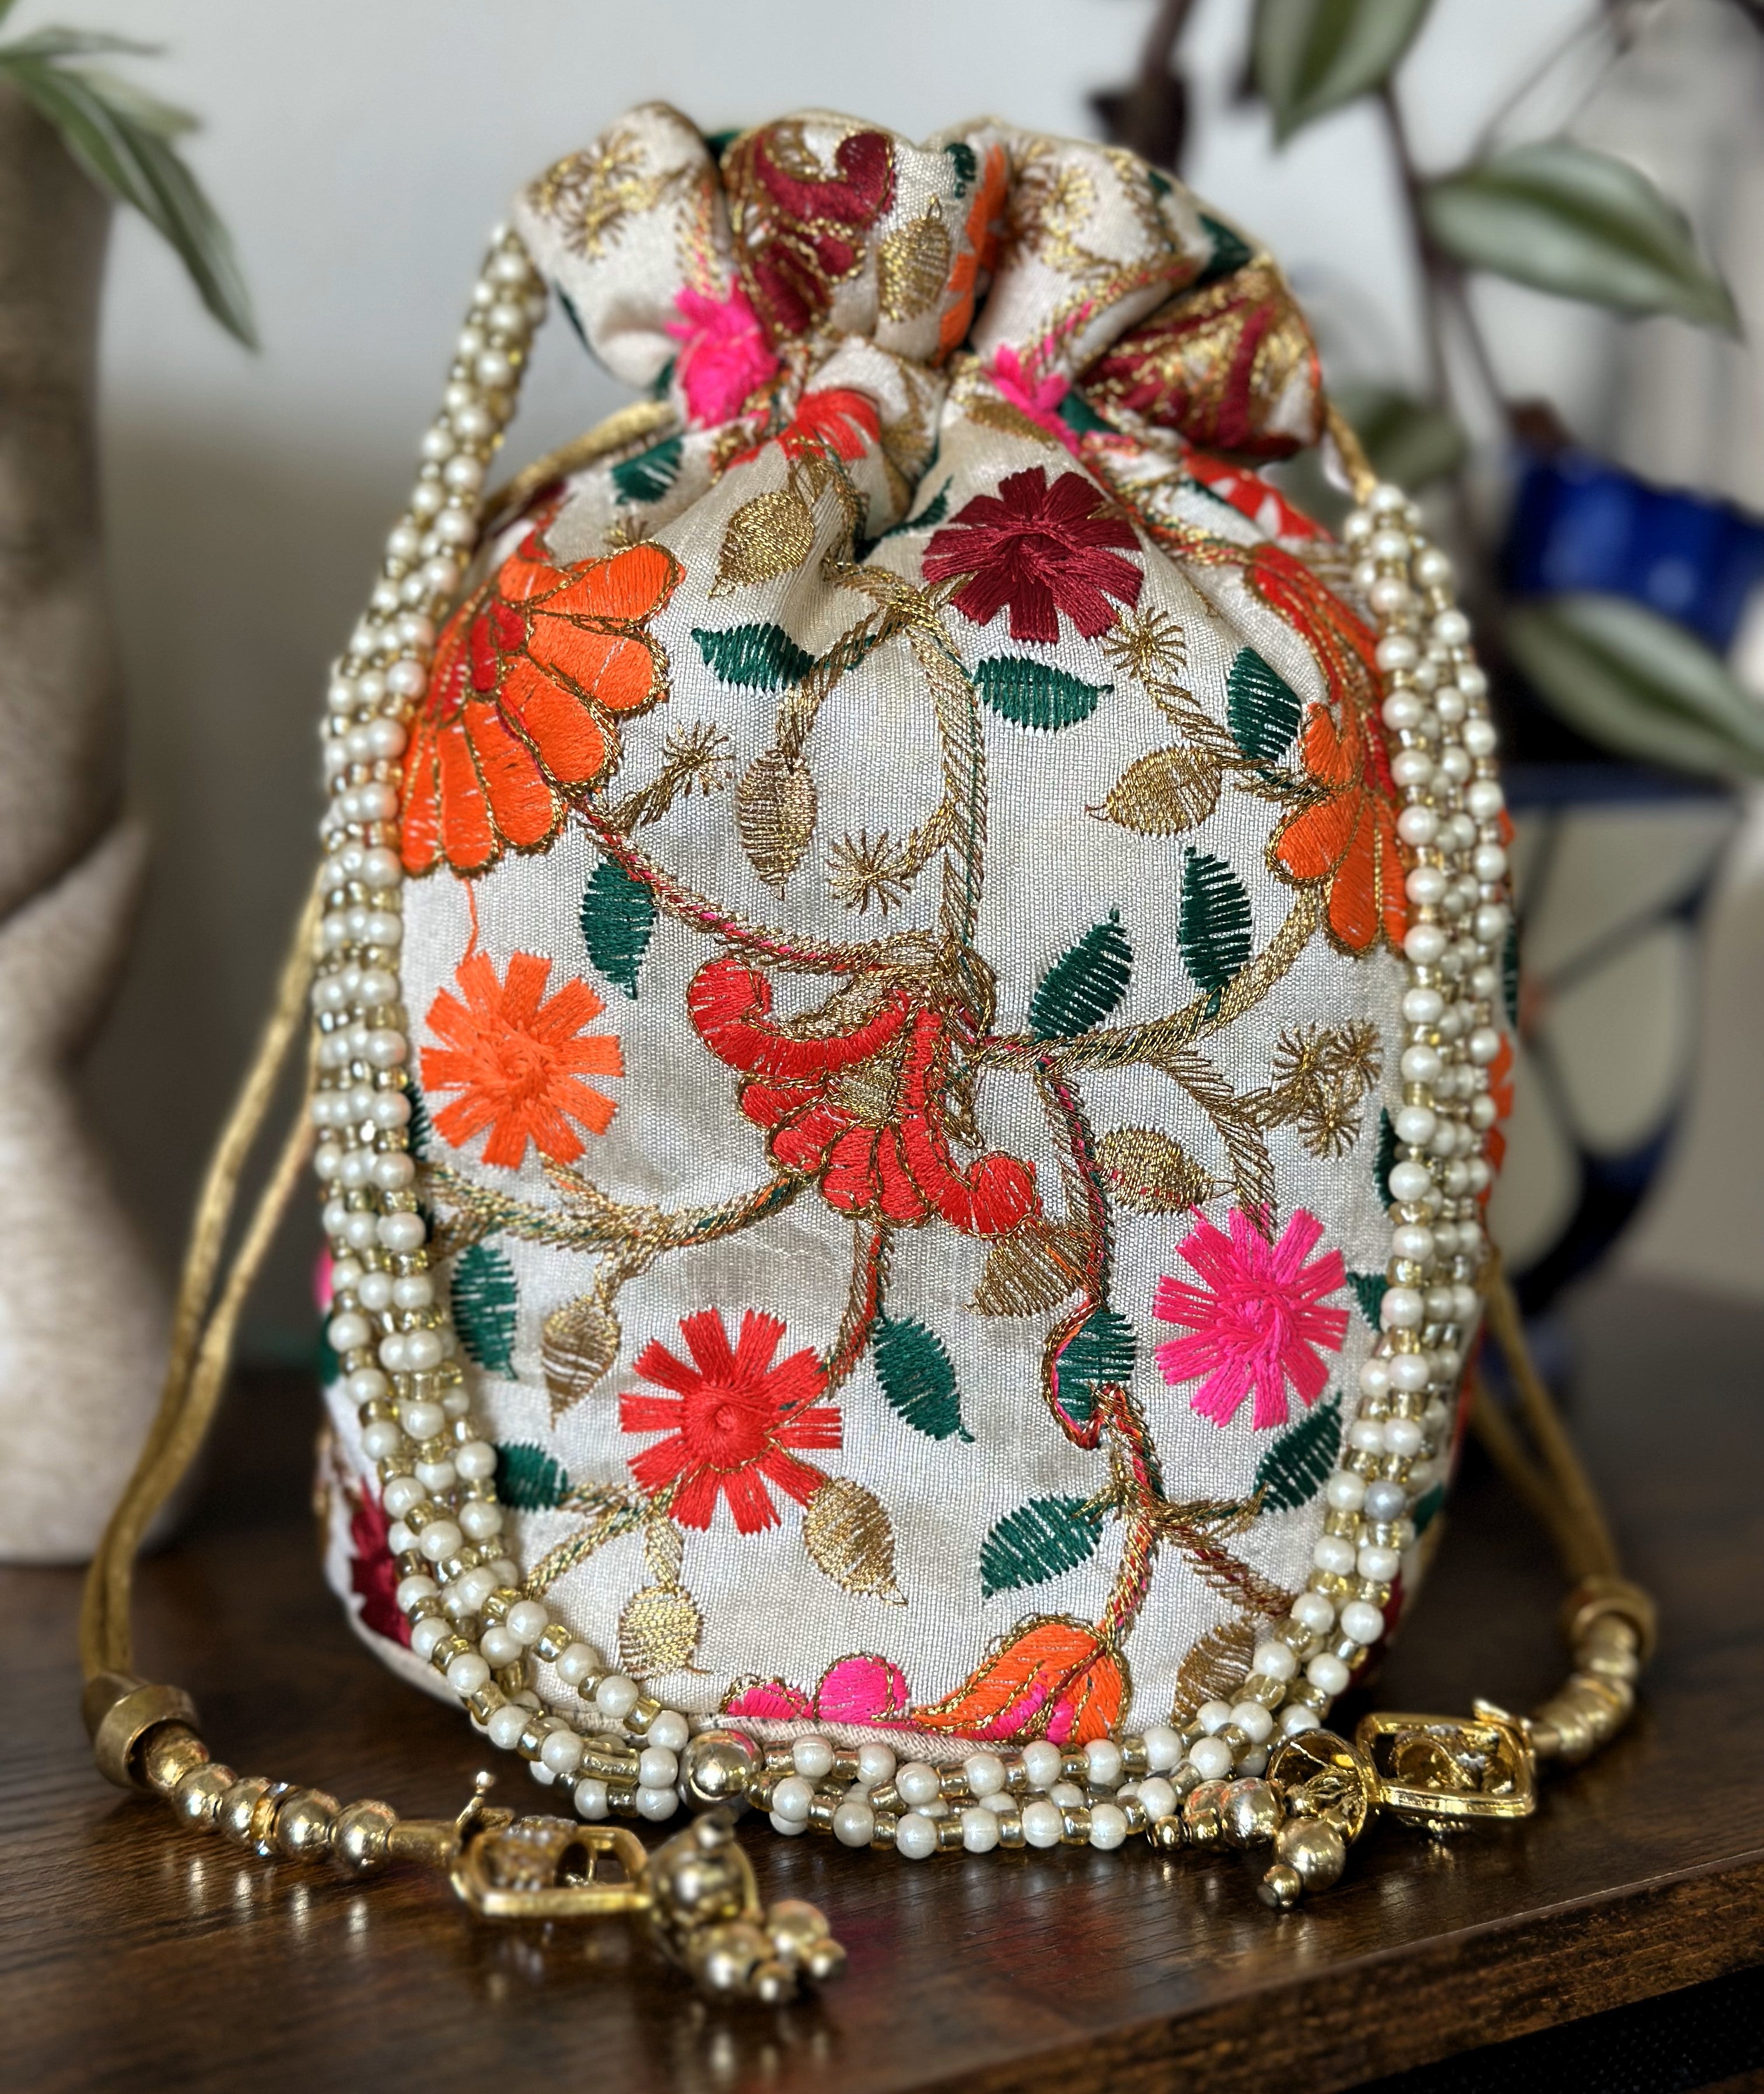 Buy NR BY NIDHI RATHI Women Peach-Coloured & White Embroidered Potli Clutch  online